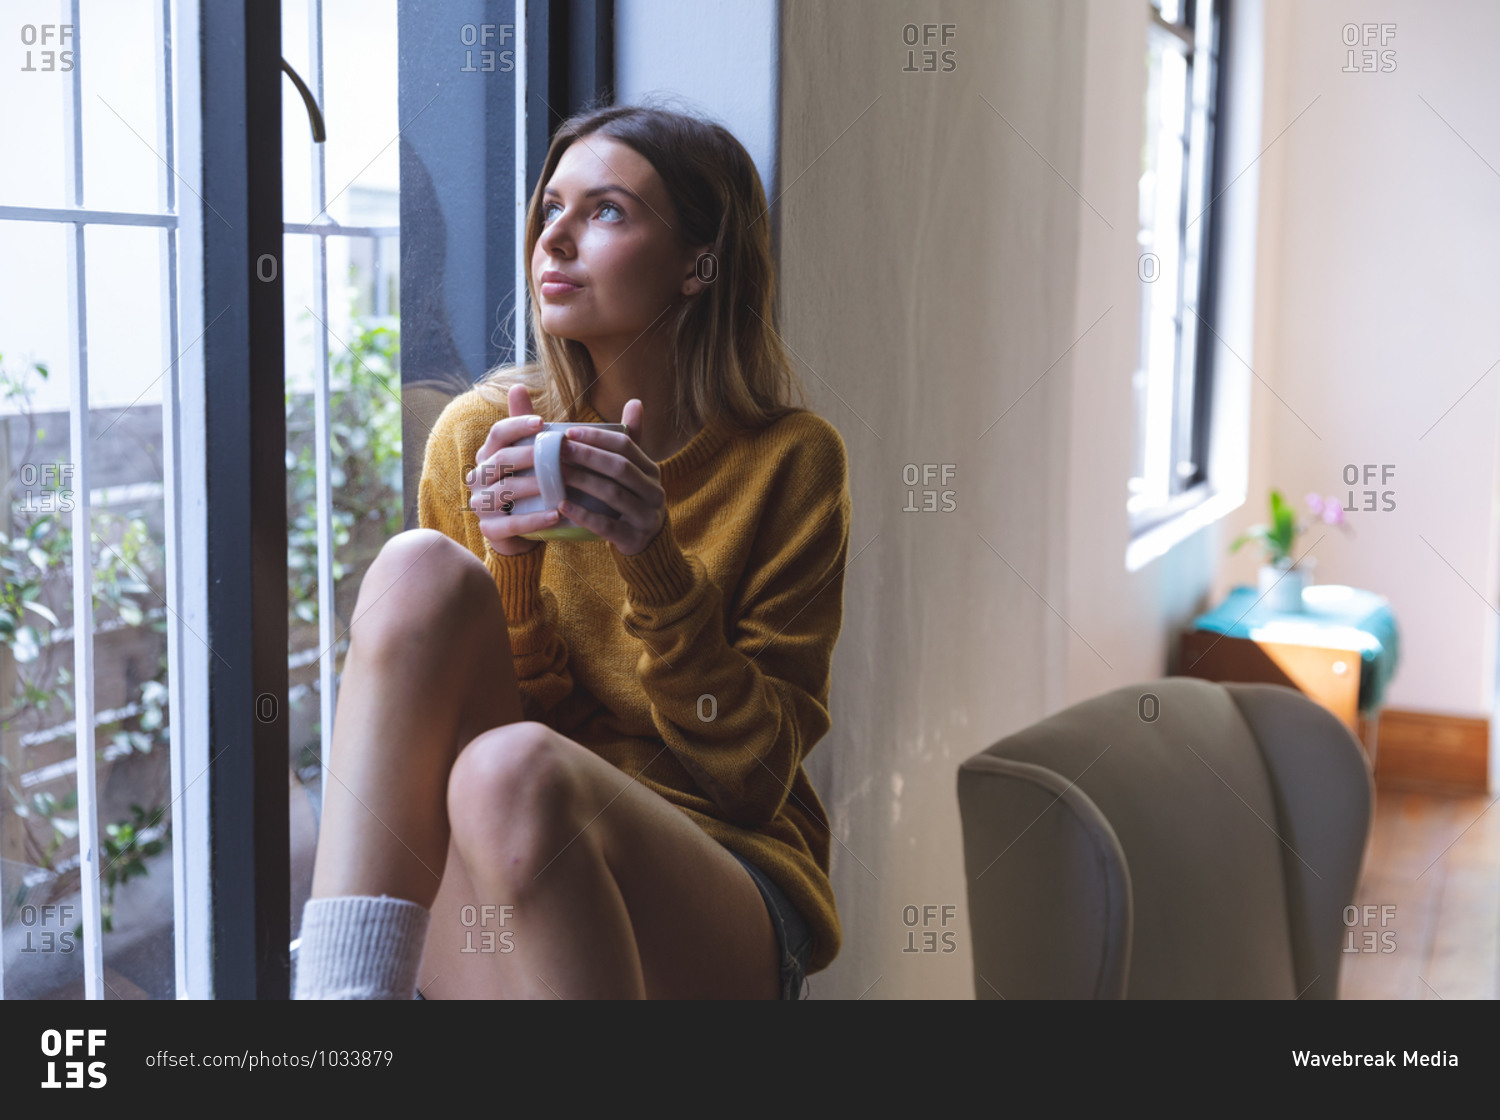 Caucasian woman spending time at home, sitting on windowsill in living room, holding green mug looking out of window. Social distancing during Covid 19 Coronavirus quarantine lockdown.